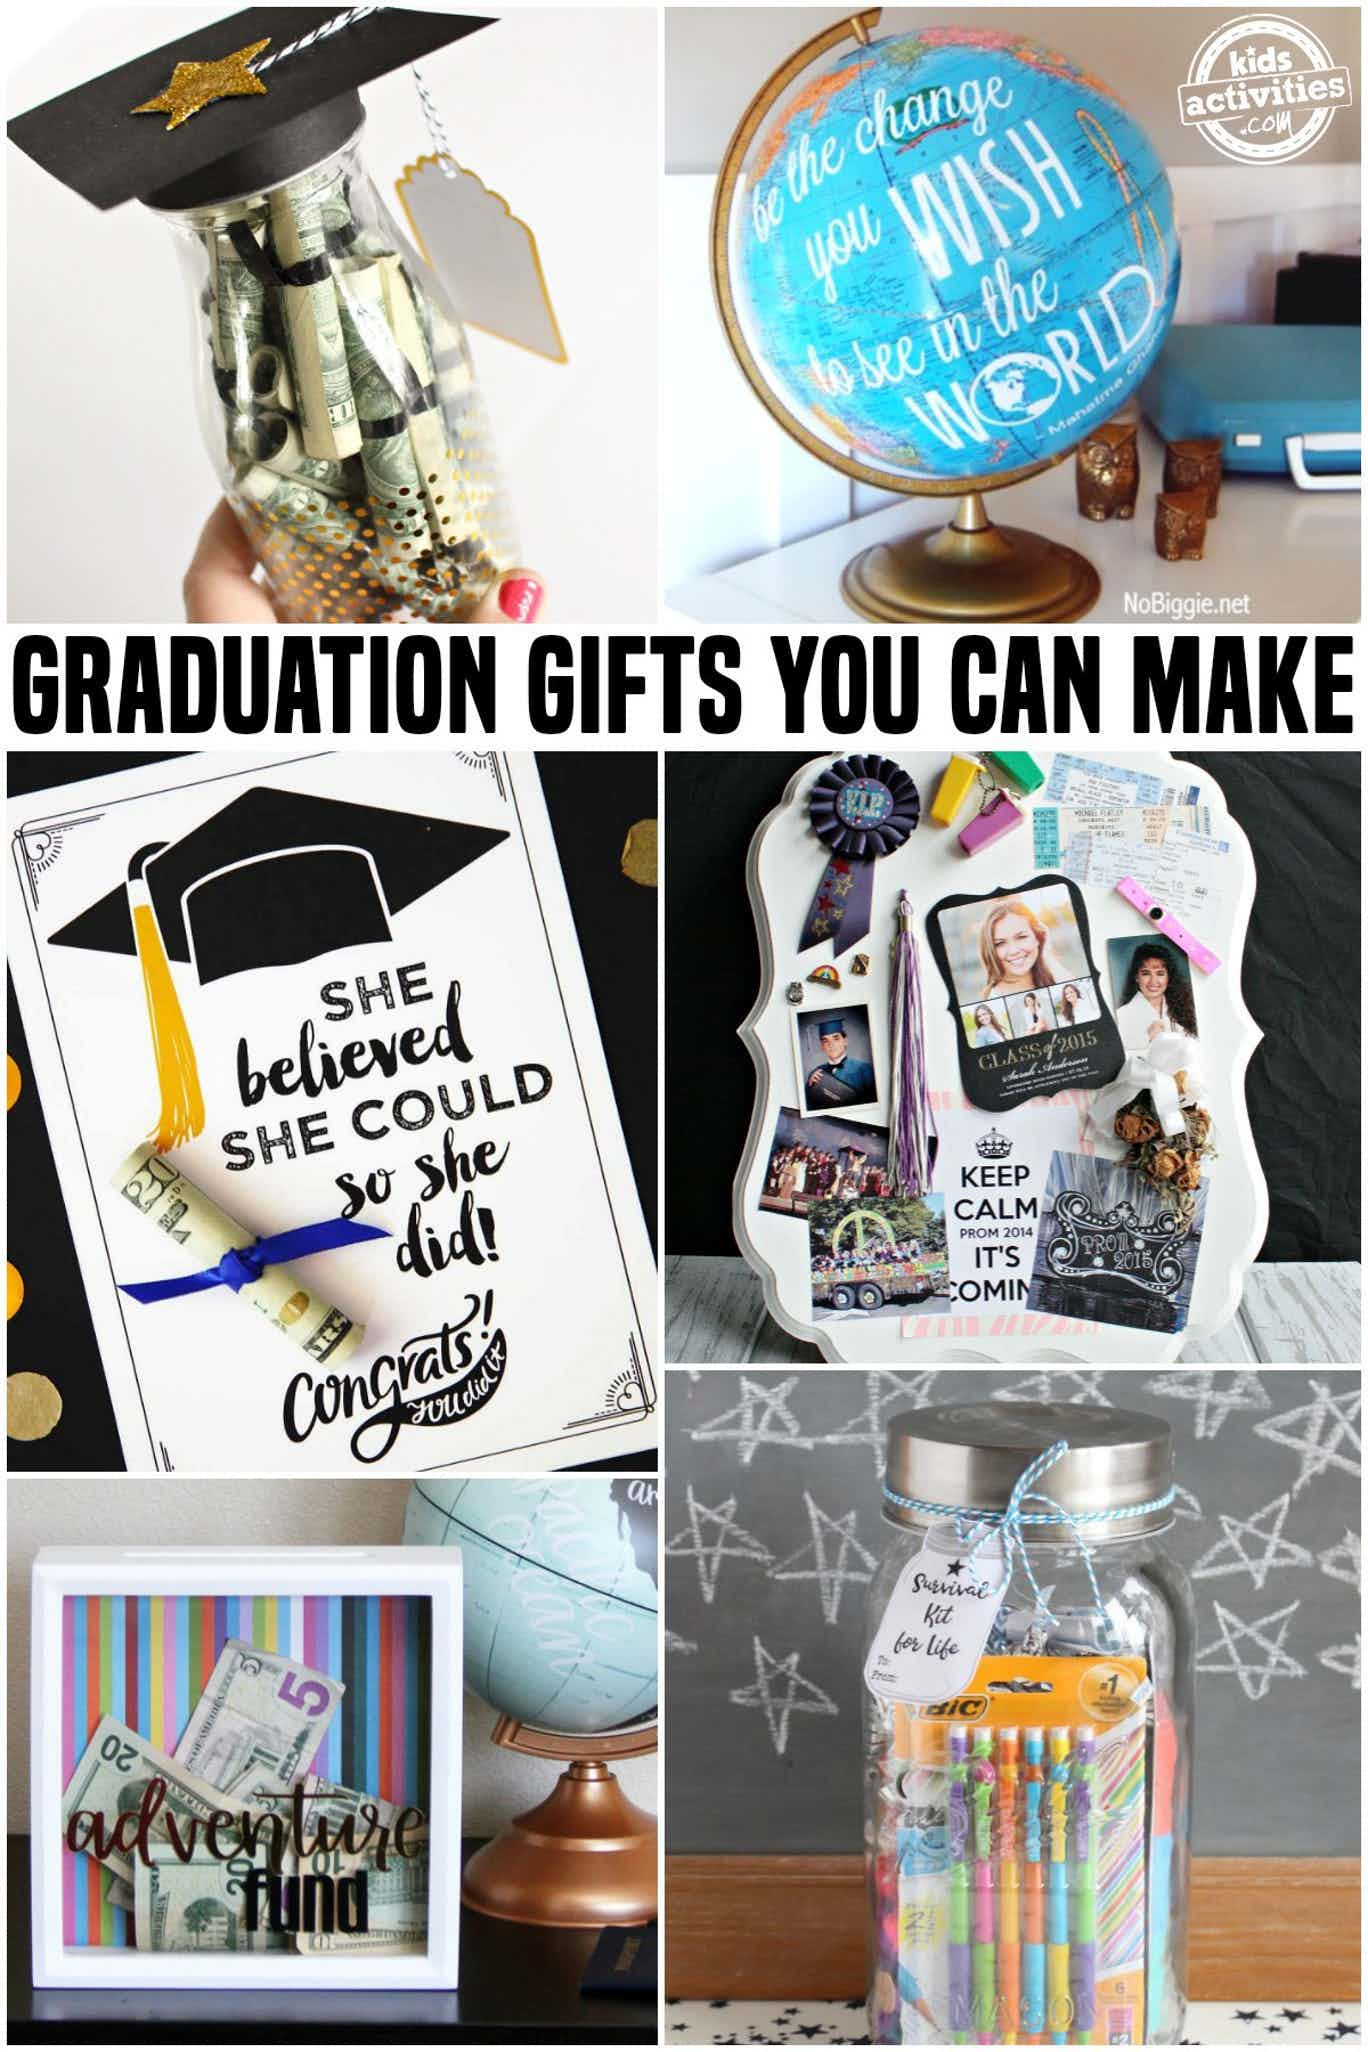 DIY Graduation Gifts
 Awesome Graduation Gifts You Can Make At Home